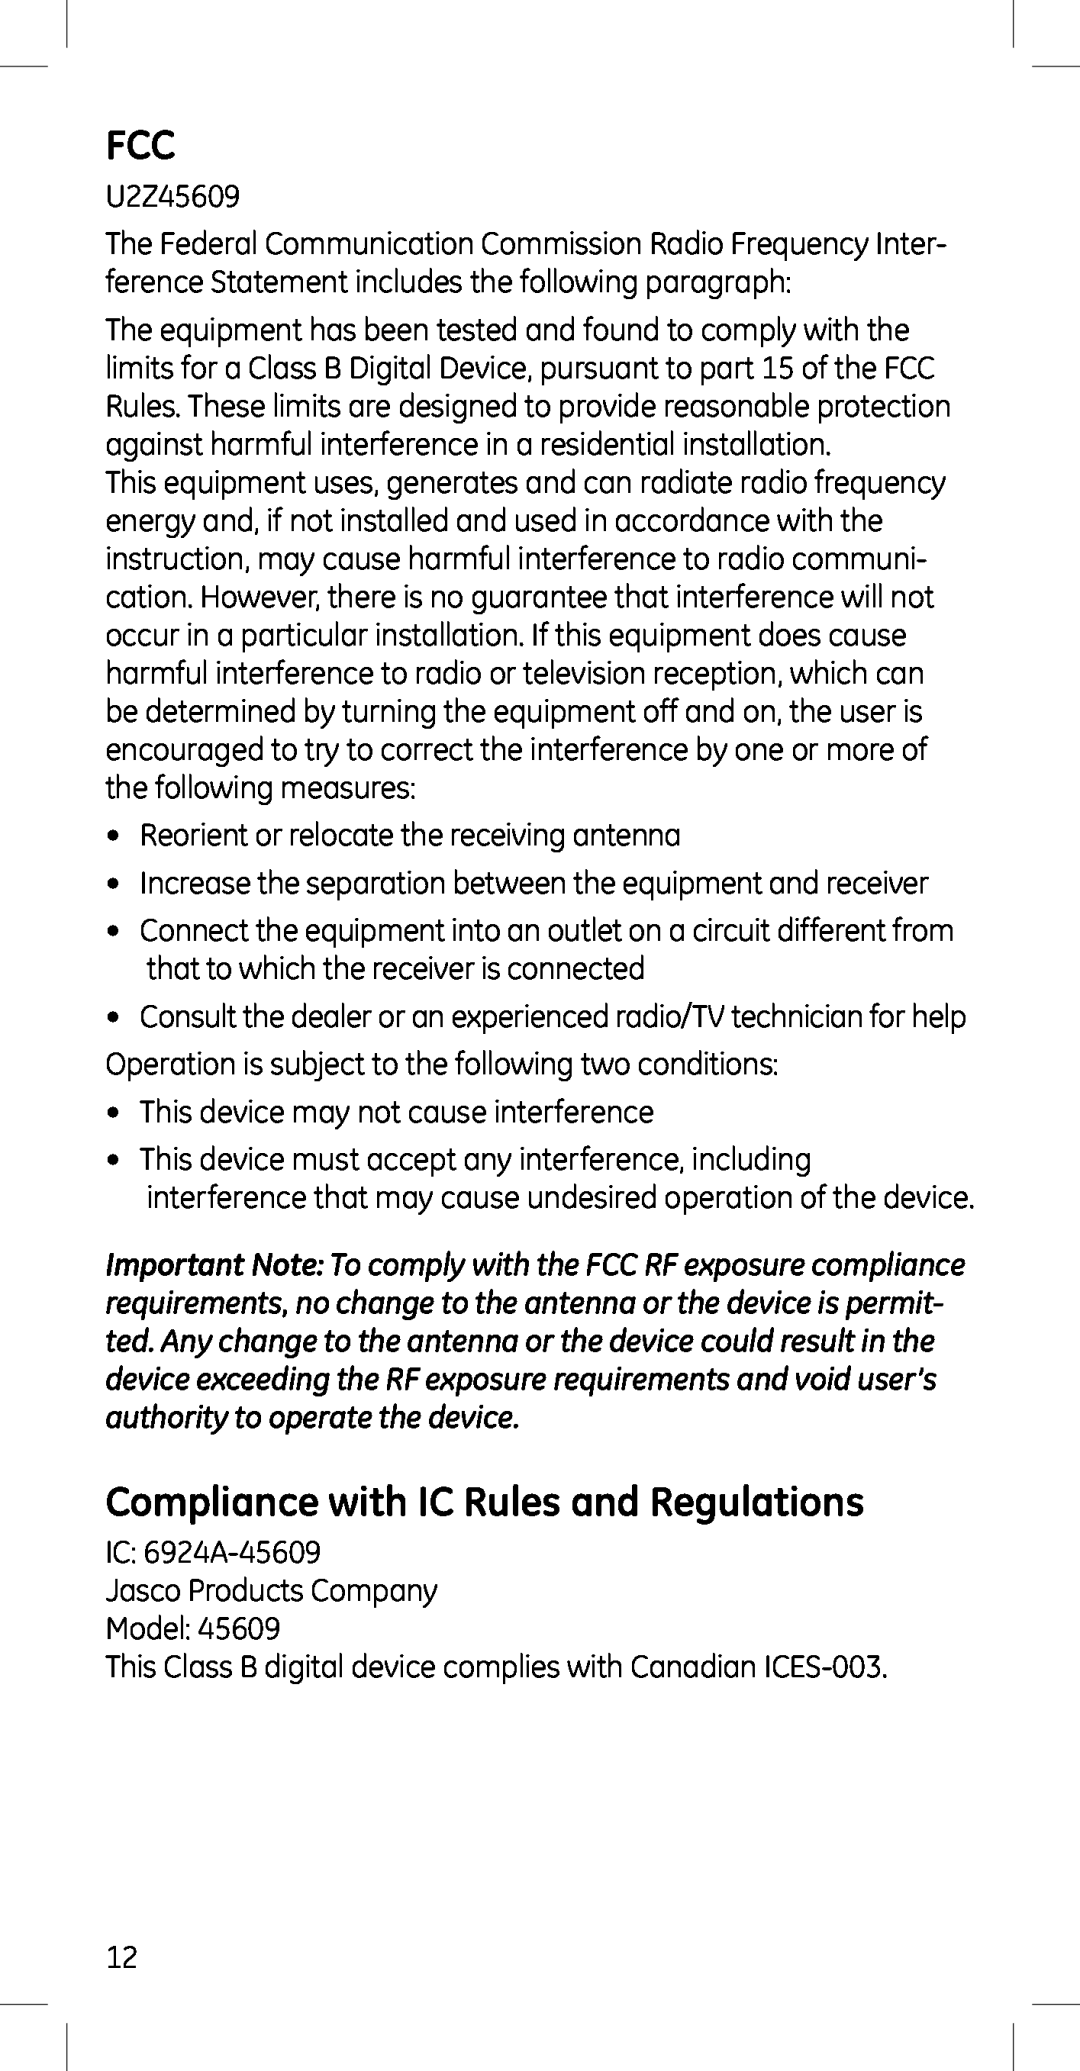 Jasco 45609 manual Compliance with IC Rules and Regulations 